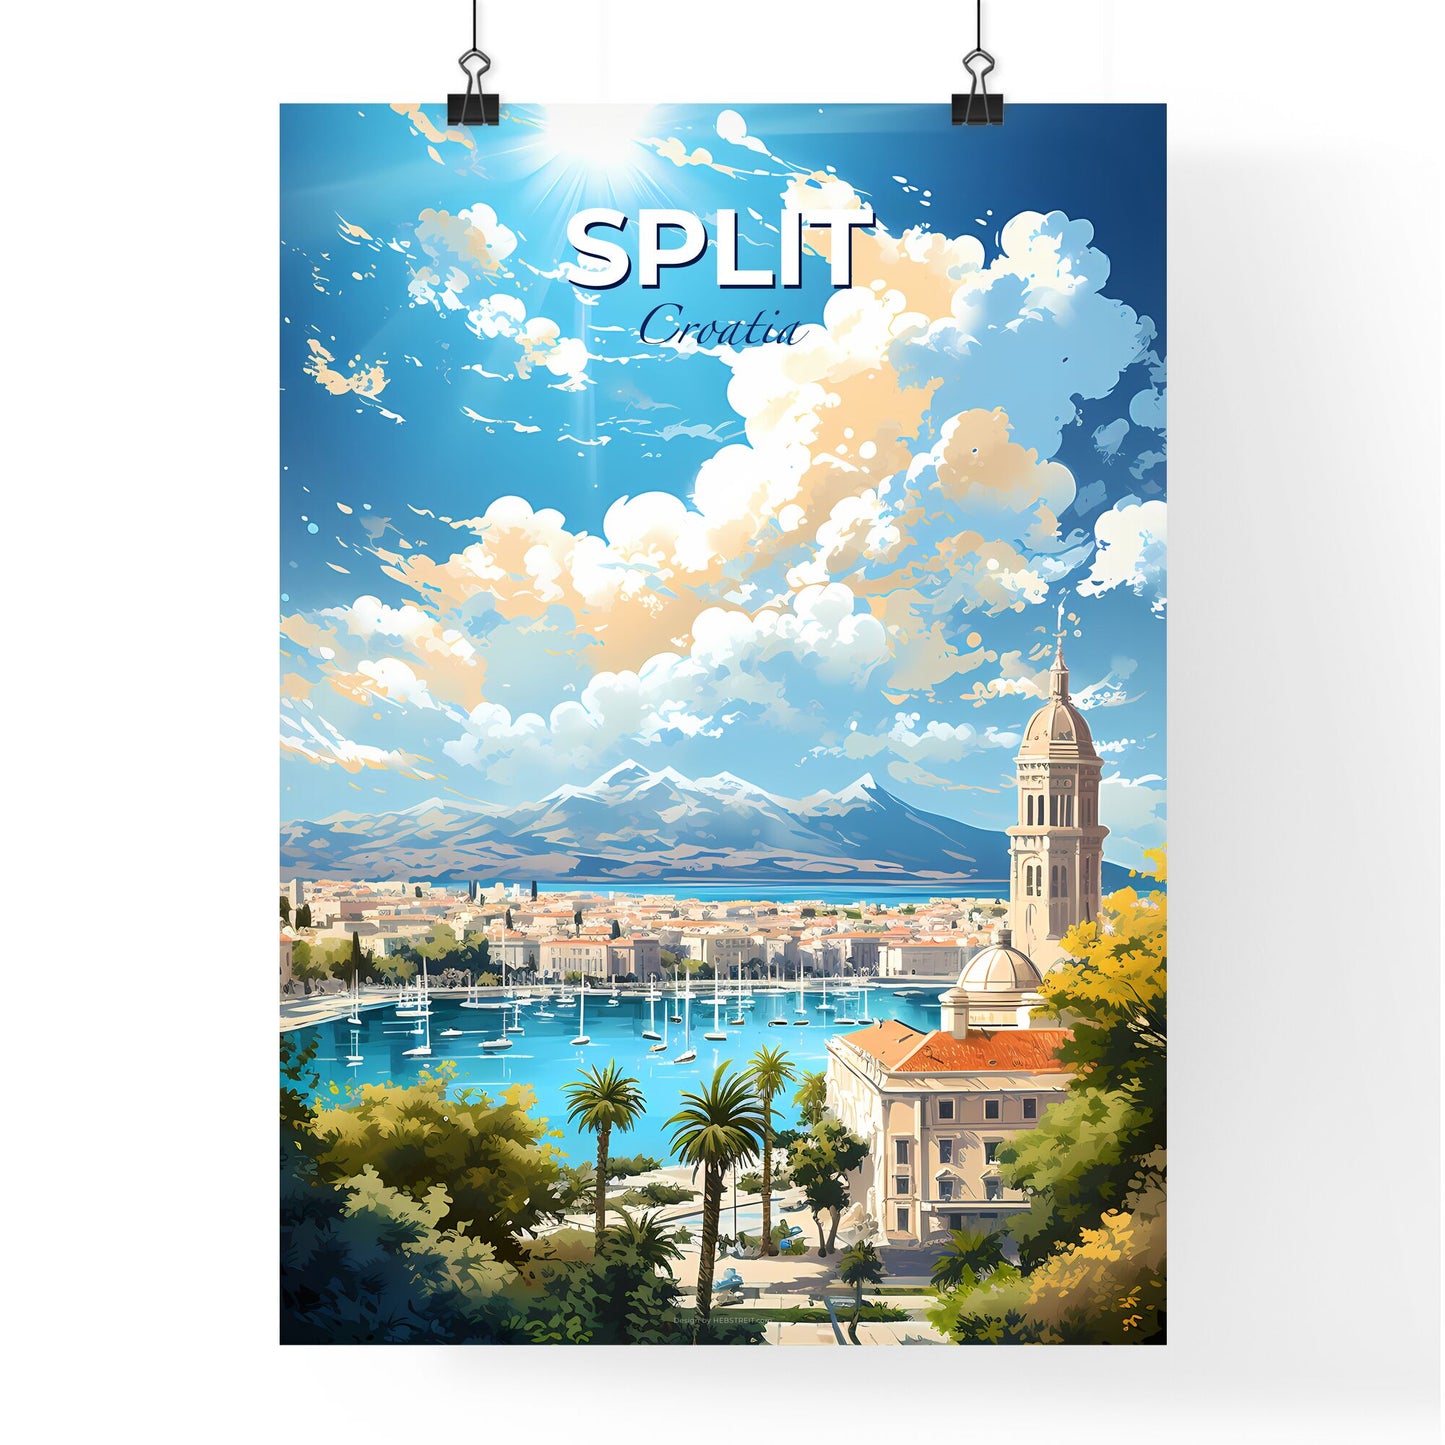 Split Croatia Skyline - A City With Boats In The Water - Customizable Travel Gift Default Title